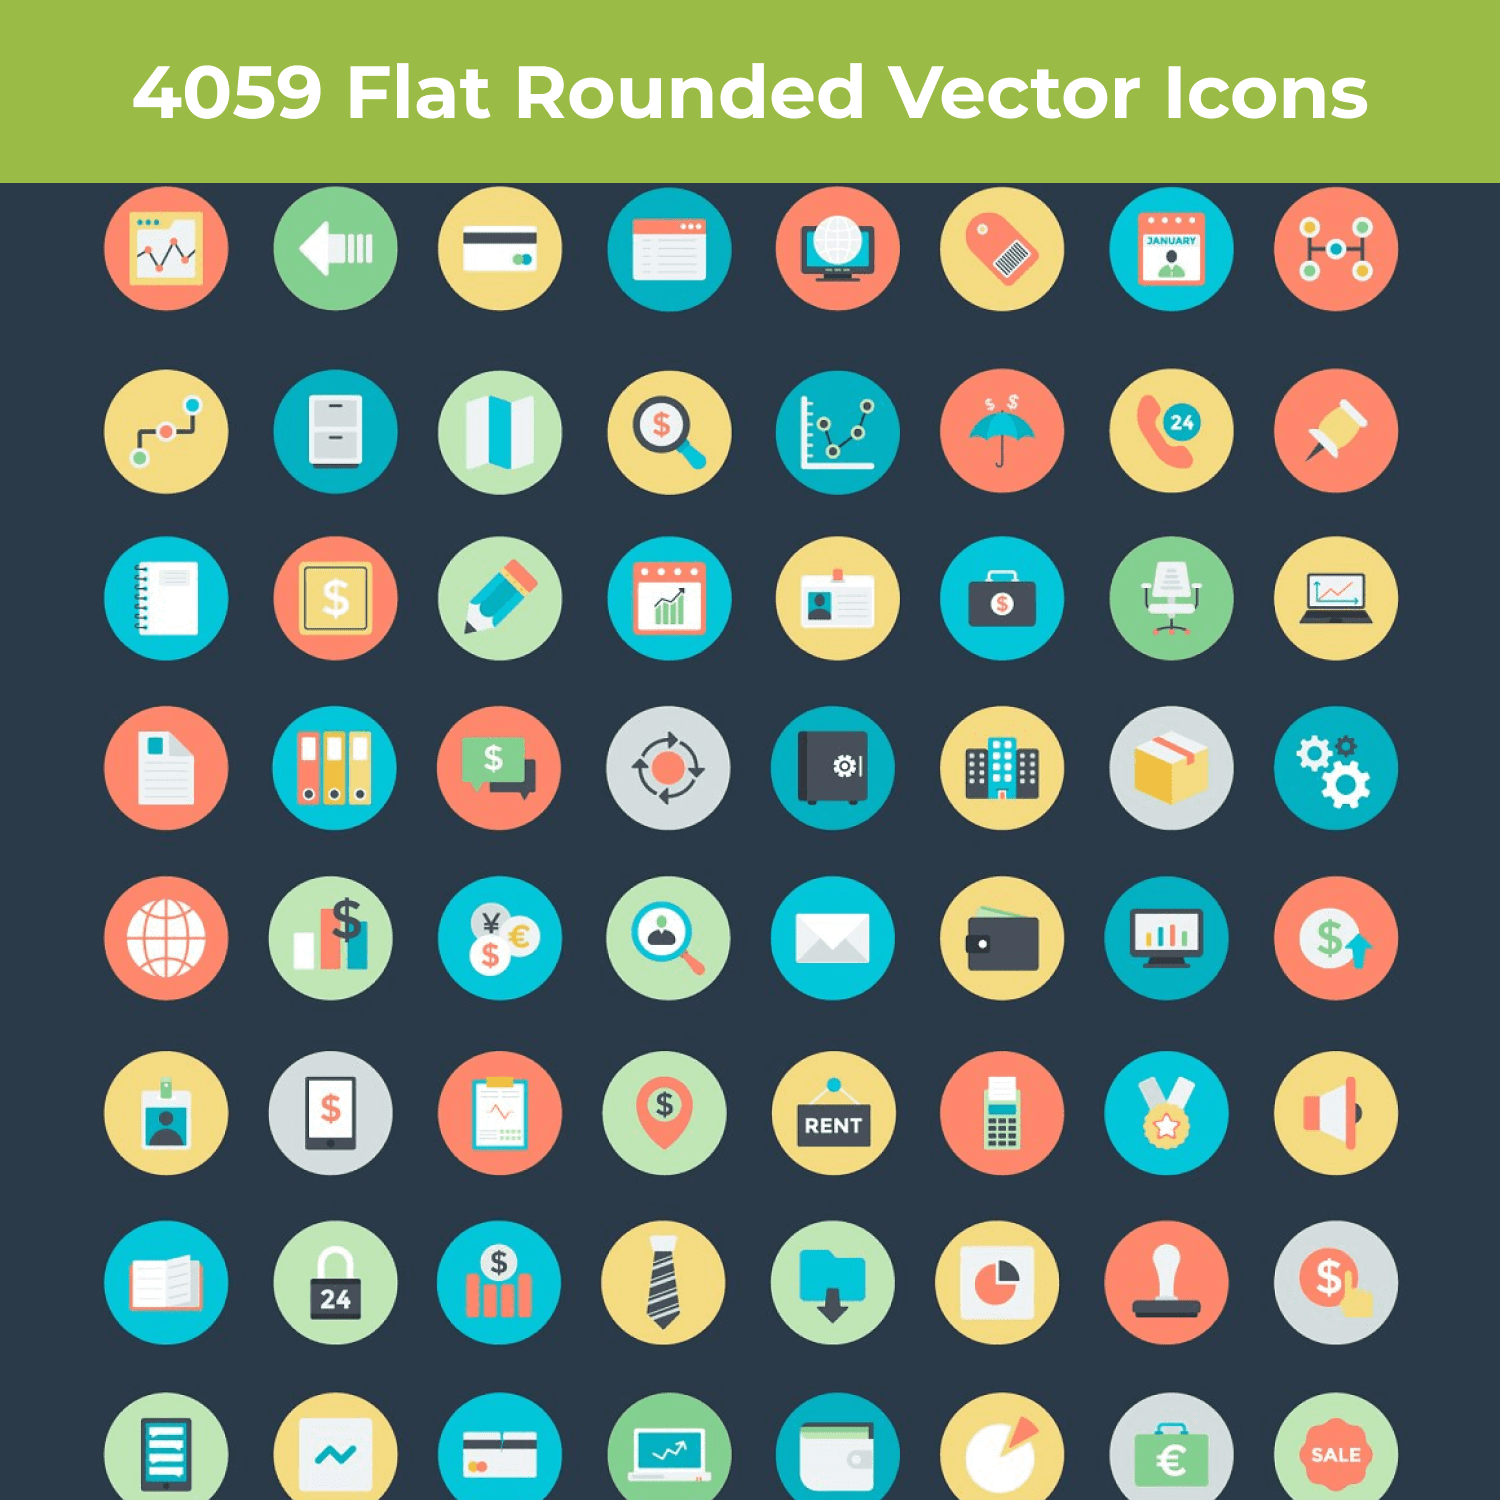 4059 Flat Rounded Vector Icons cover image.